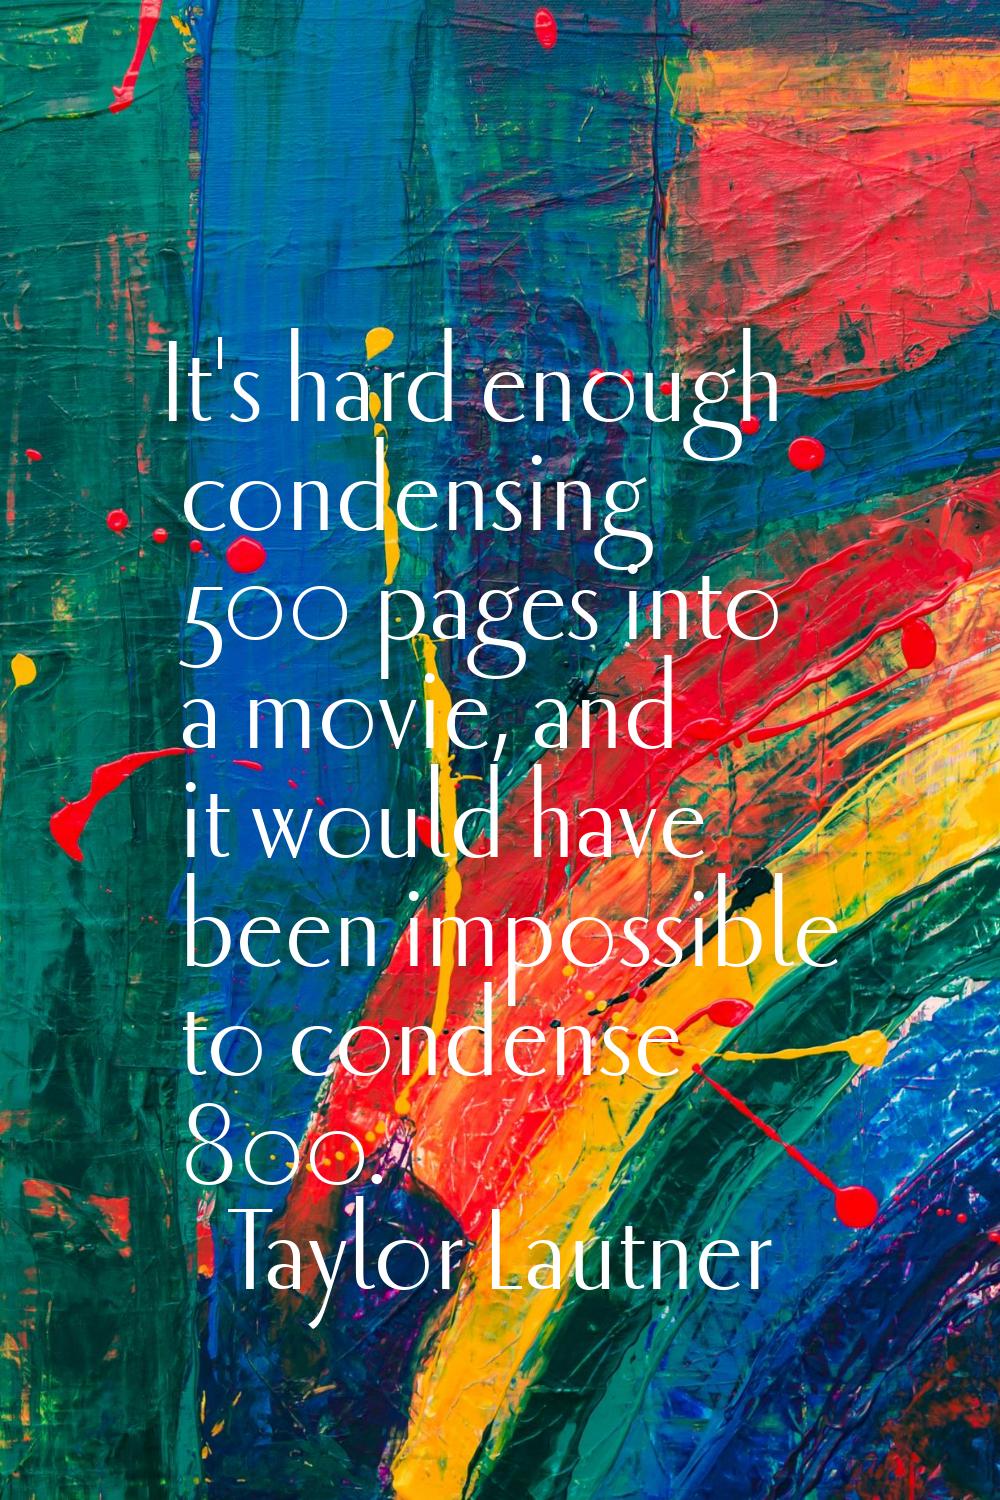 It's hard enough condensing 500 pages into a movie, and it would have been impossible to condense 8